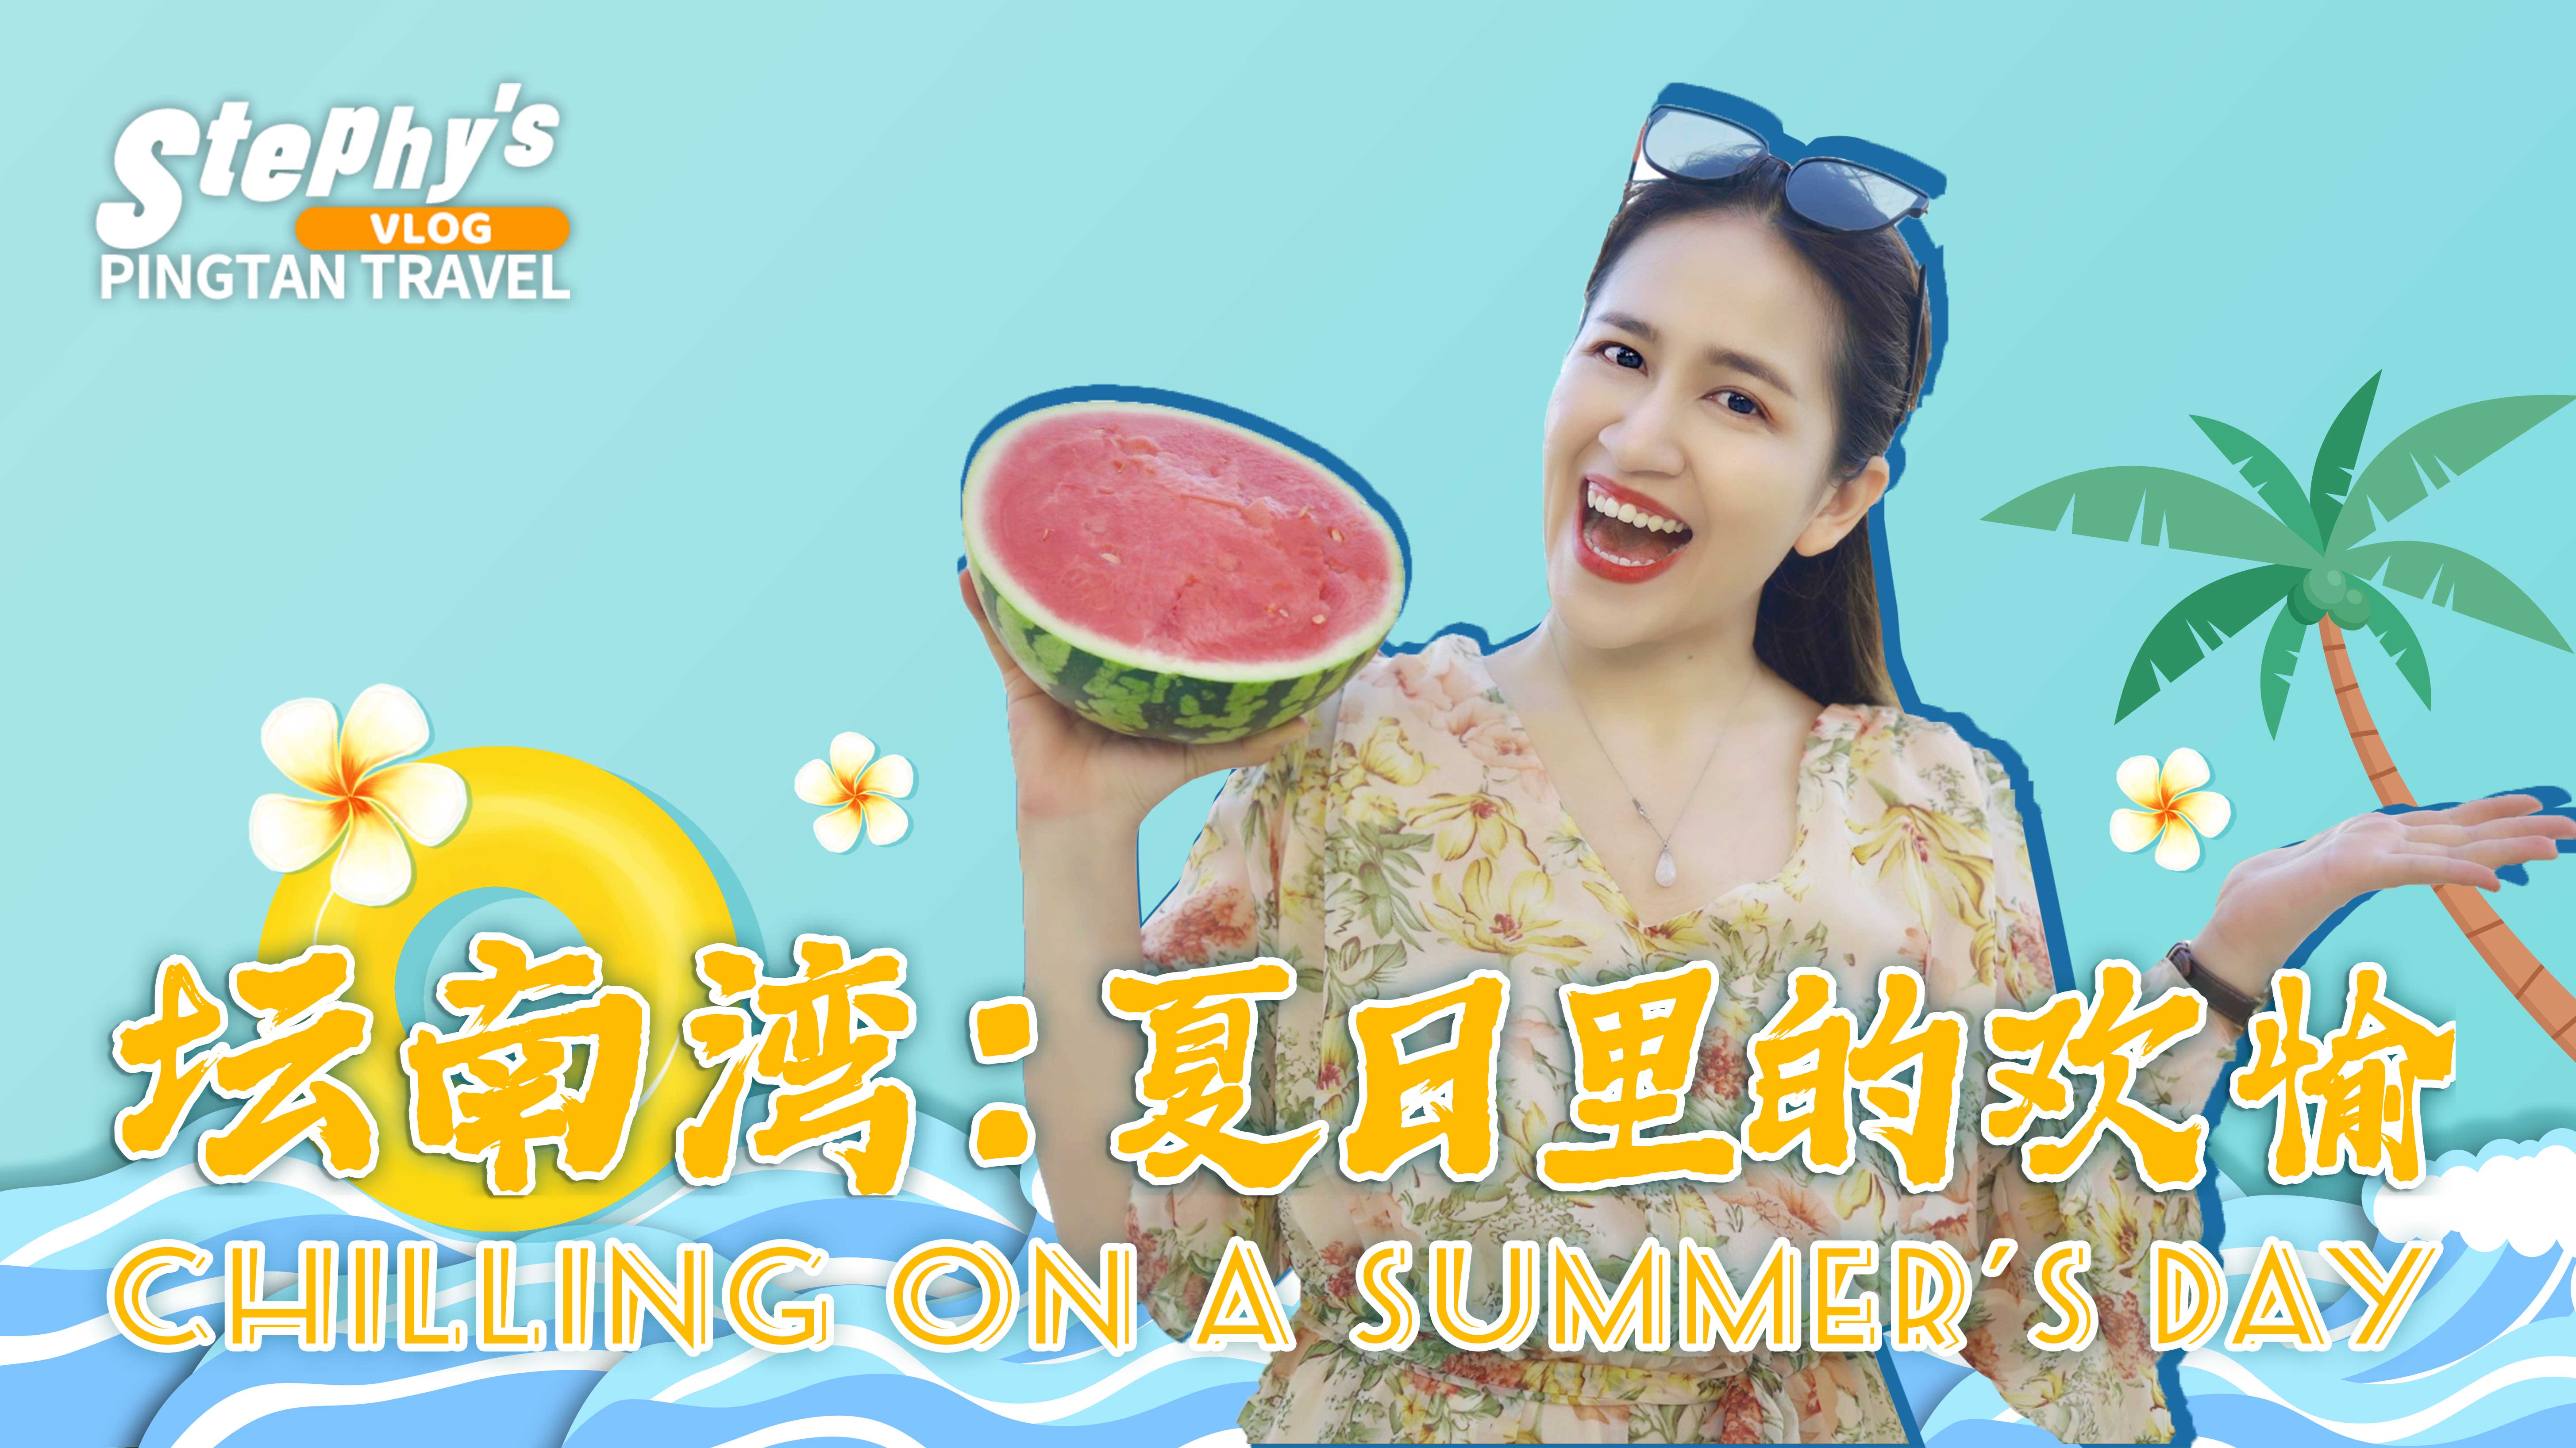 Stephy's Pingtan Travel: Chilling on a summer's day